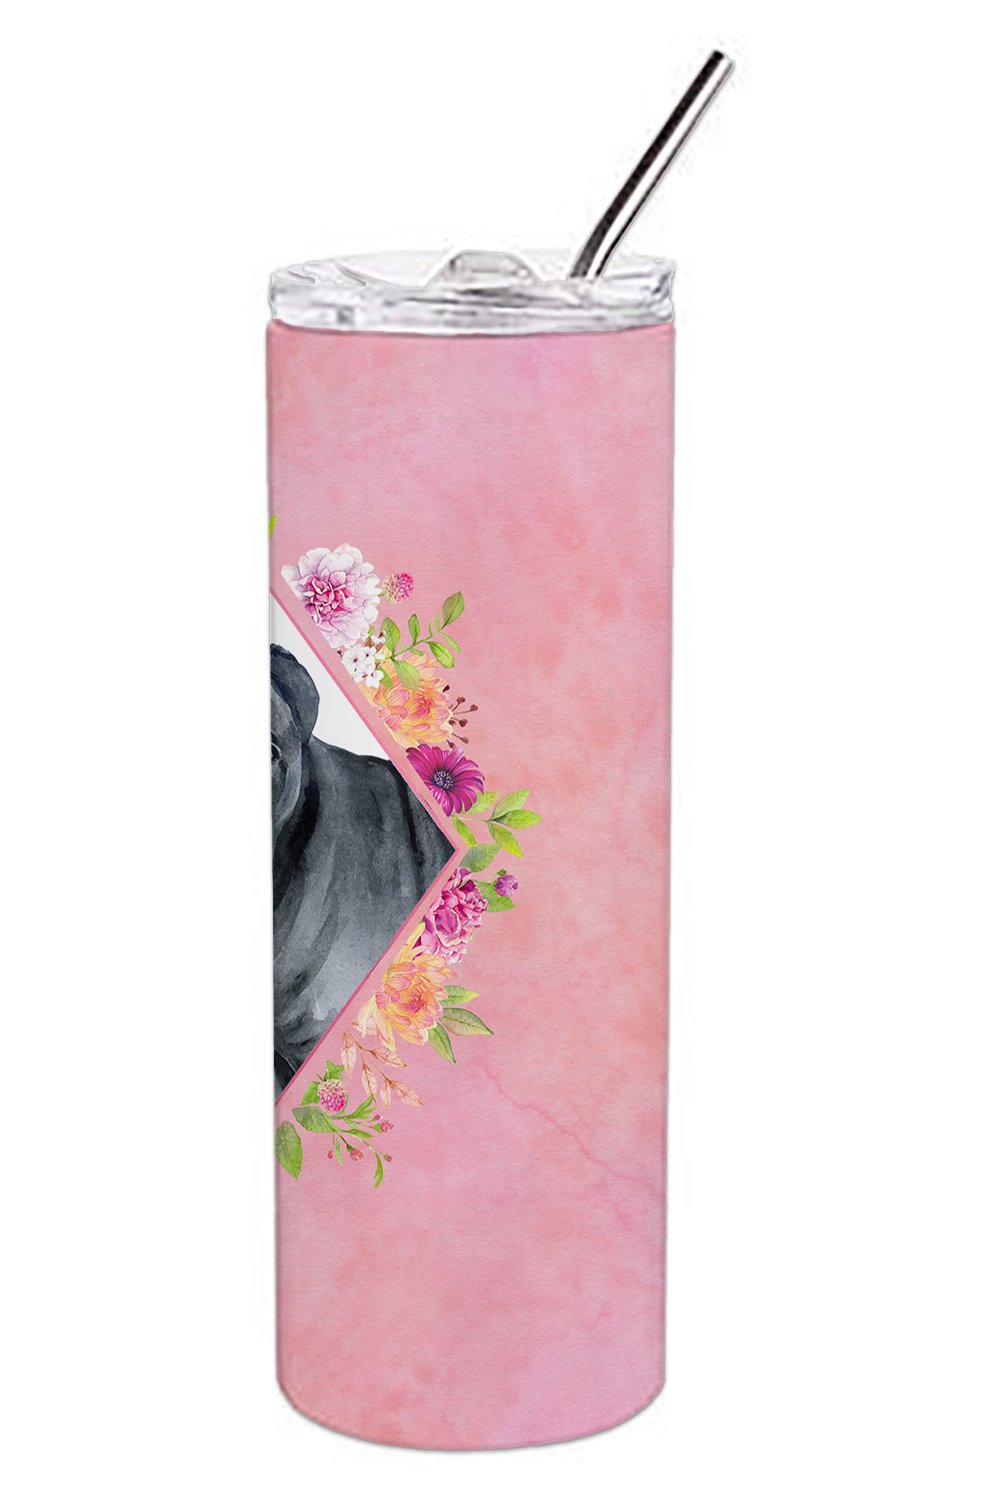 Cane Corso Pink Flowers Double Walled Stainless Steel 20 oz Skinny Tumbler CK4125TBL20 by Caroline's Treasures